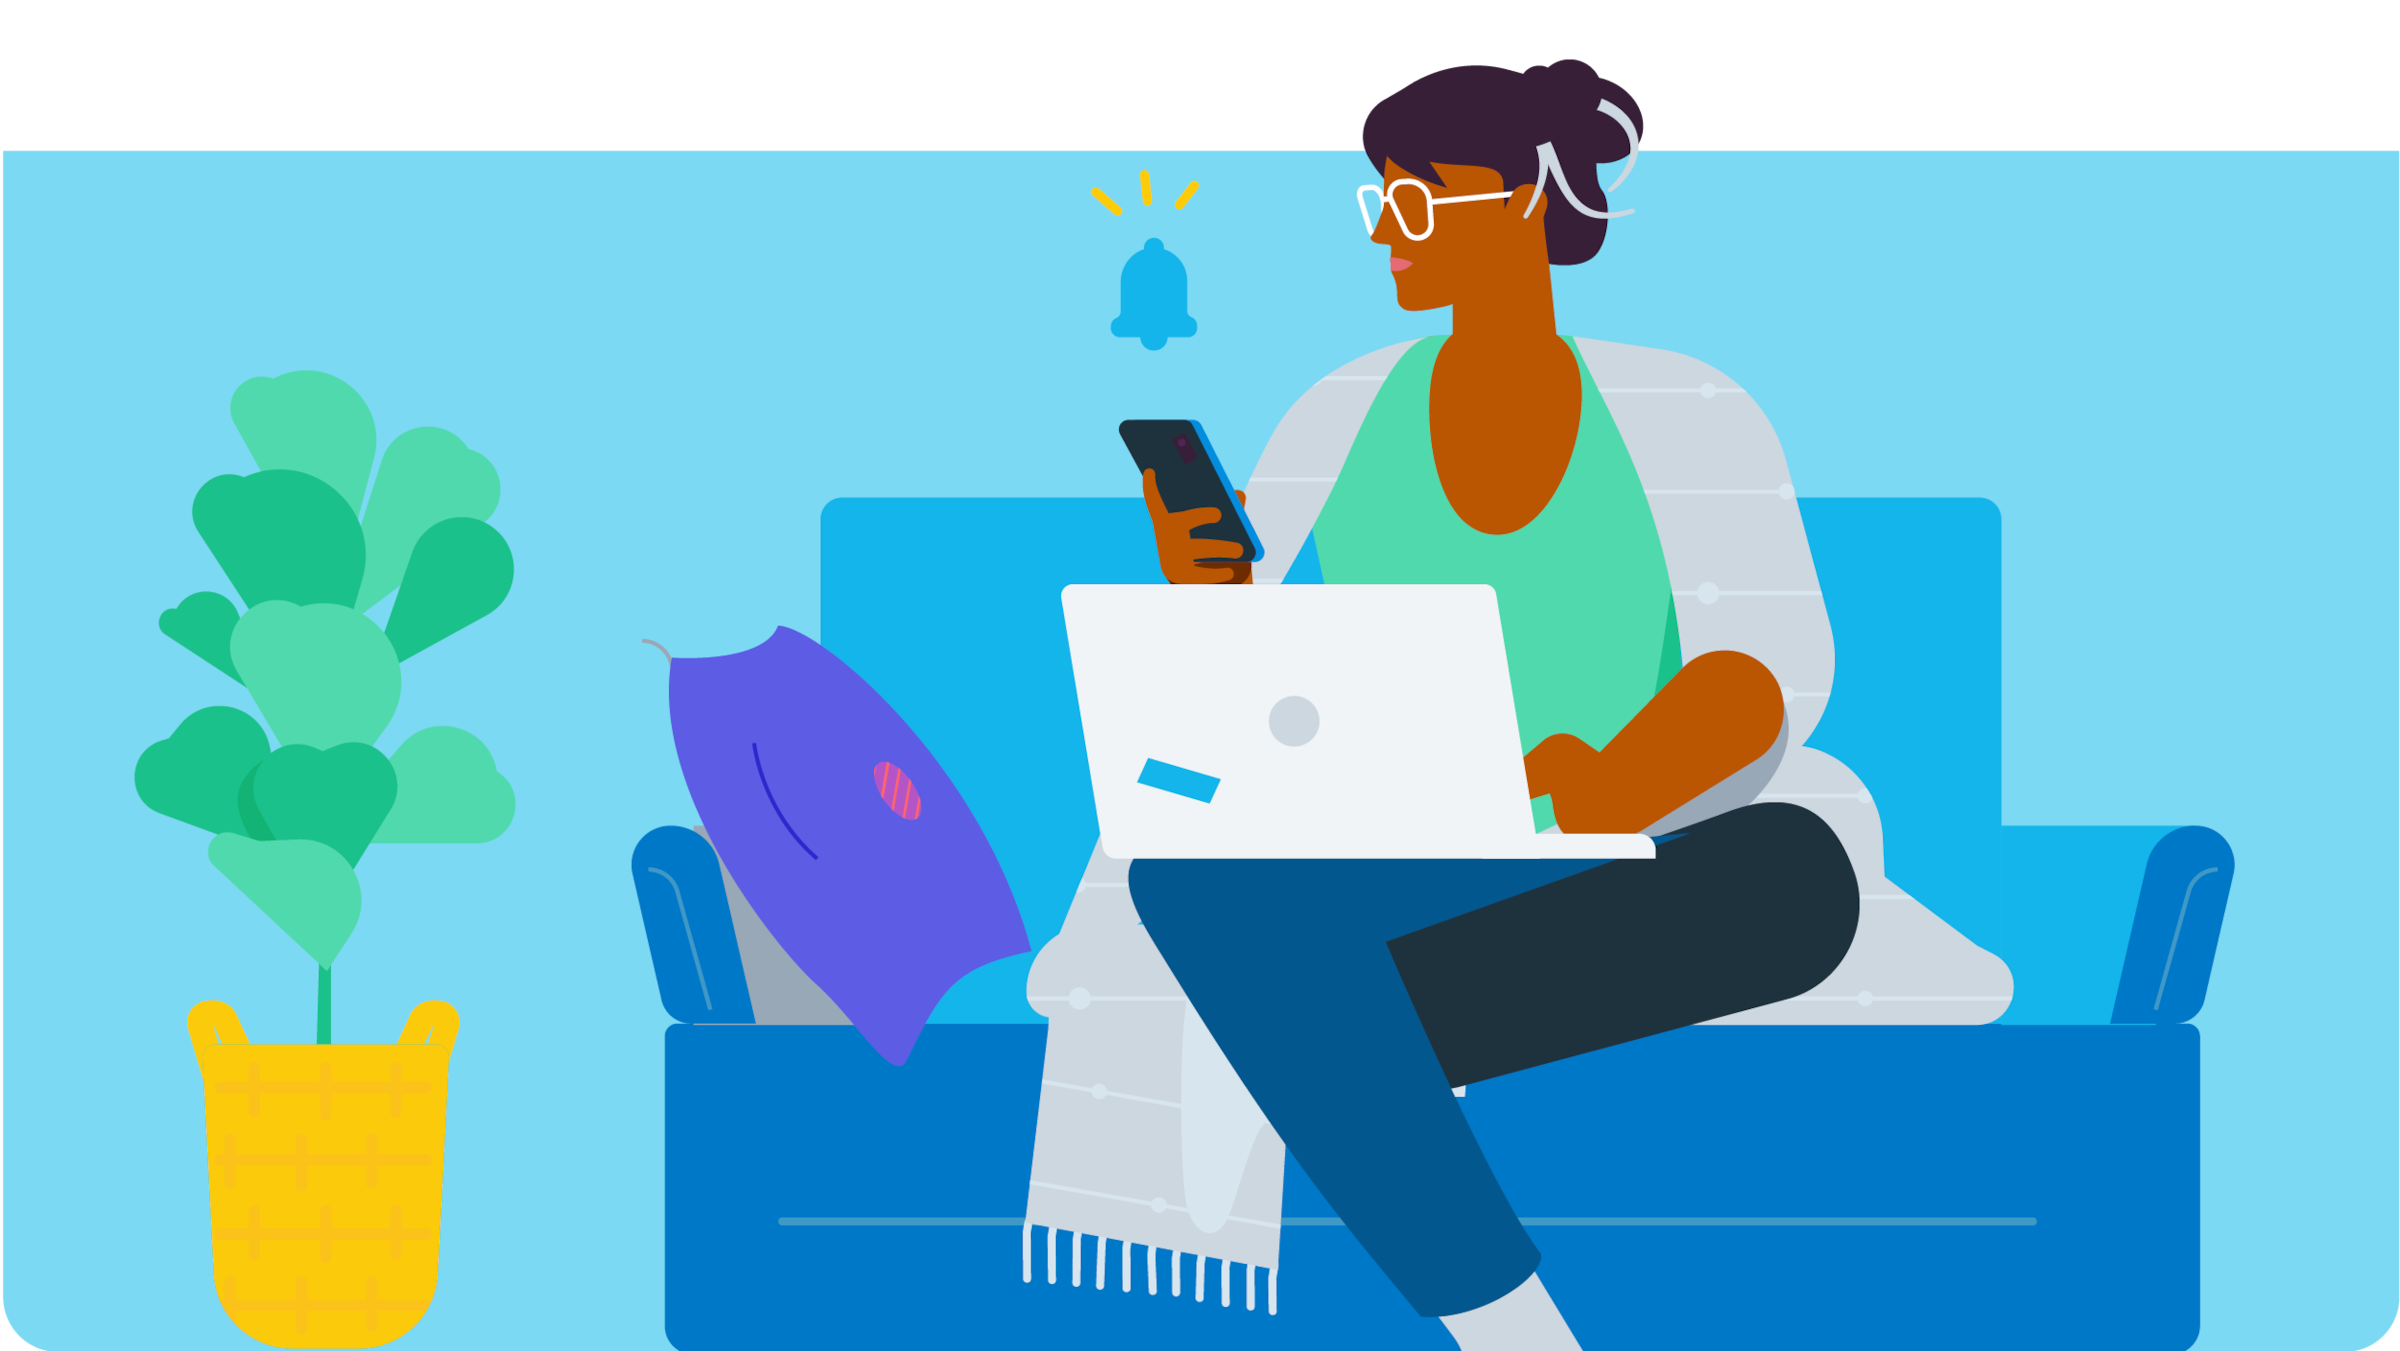 Illustrated person sitting on a couch while looking at mobile device, laptop on their leg. 